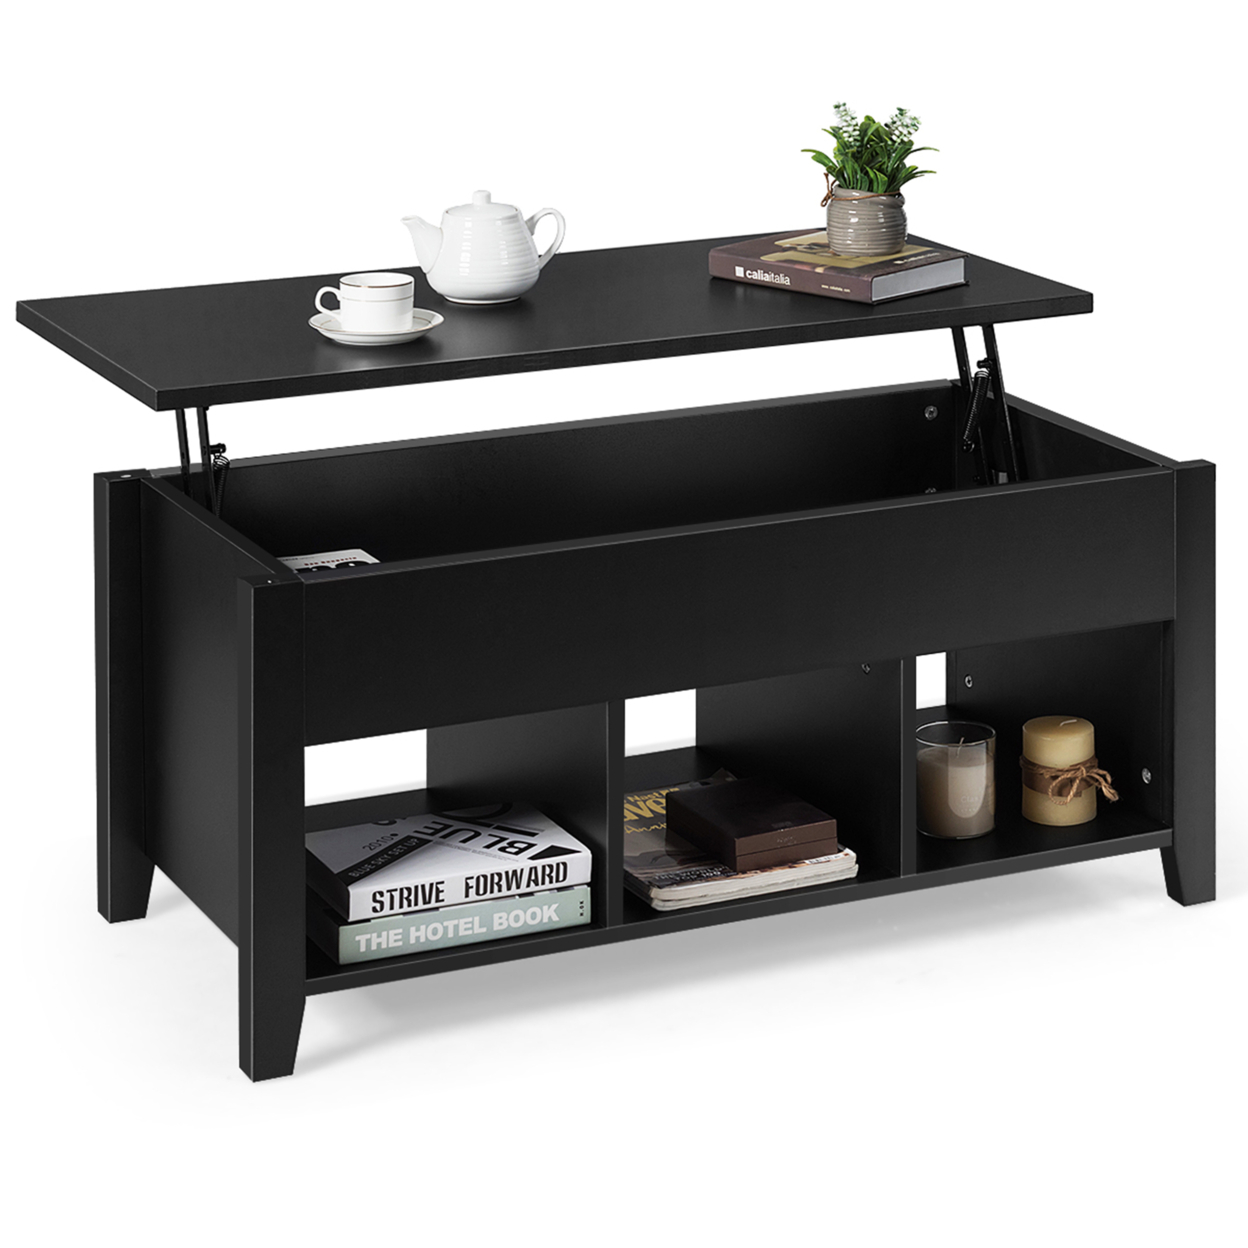 Lift Top Coffee Table W/ Storage Compartment Shelf Living Room Furniture Black